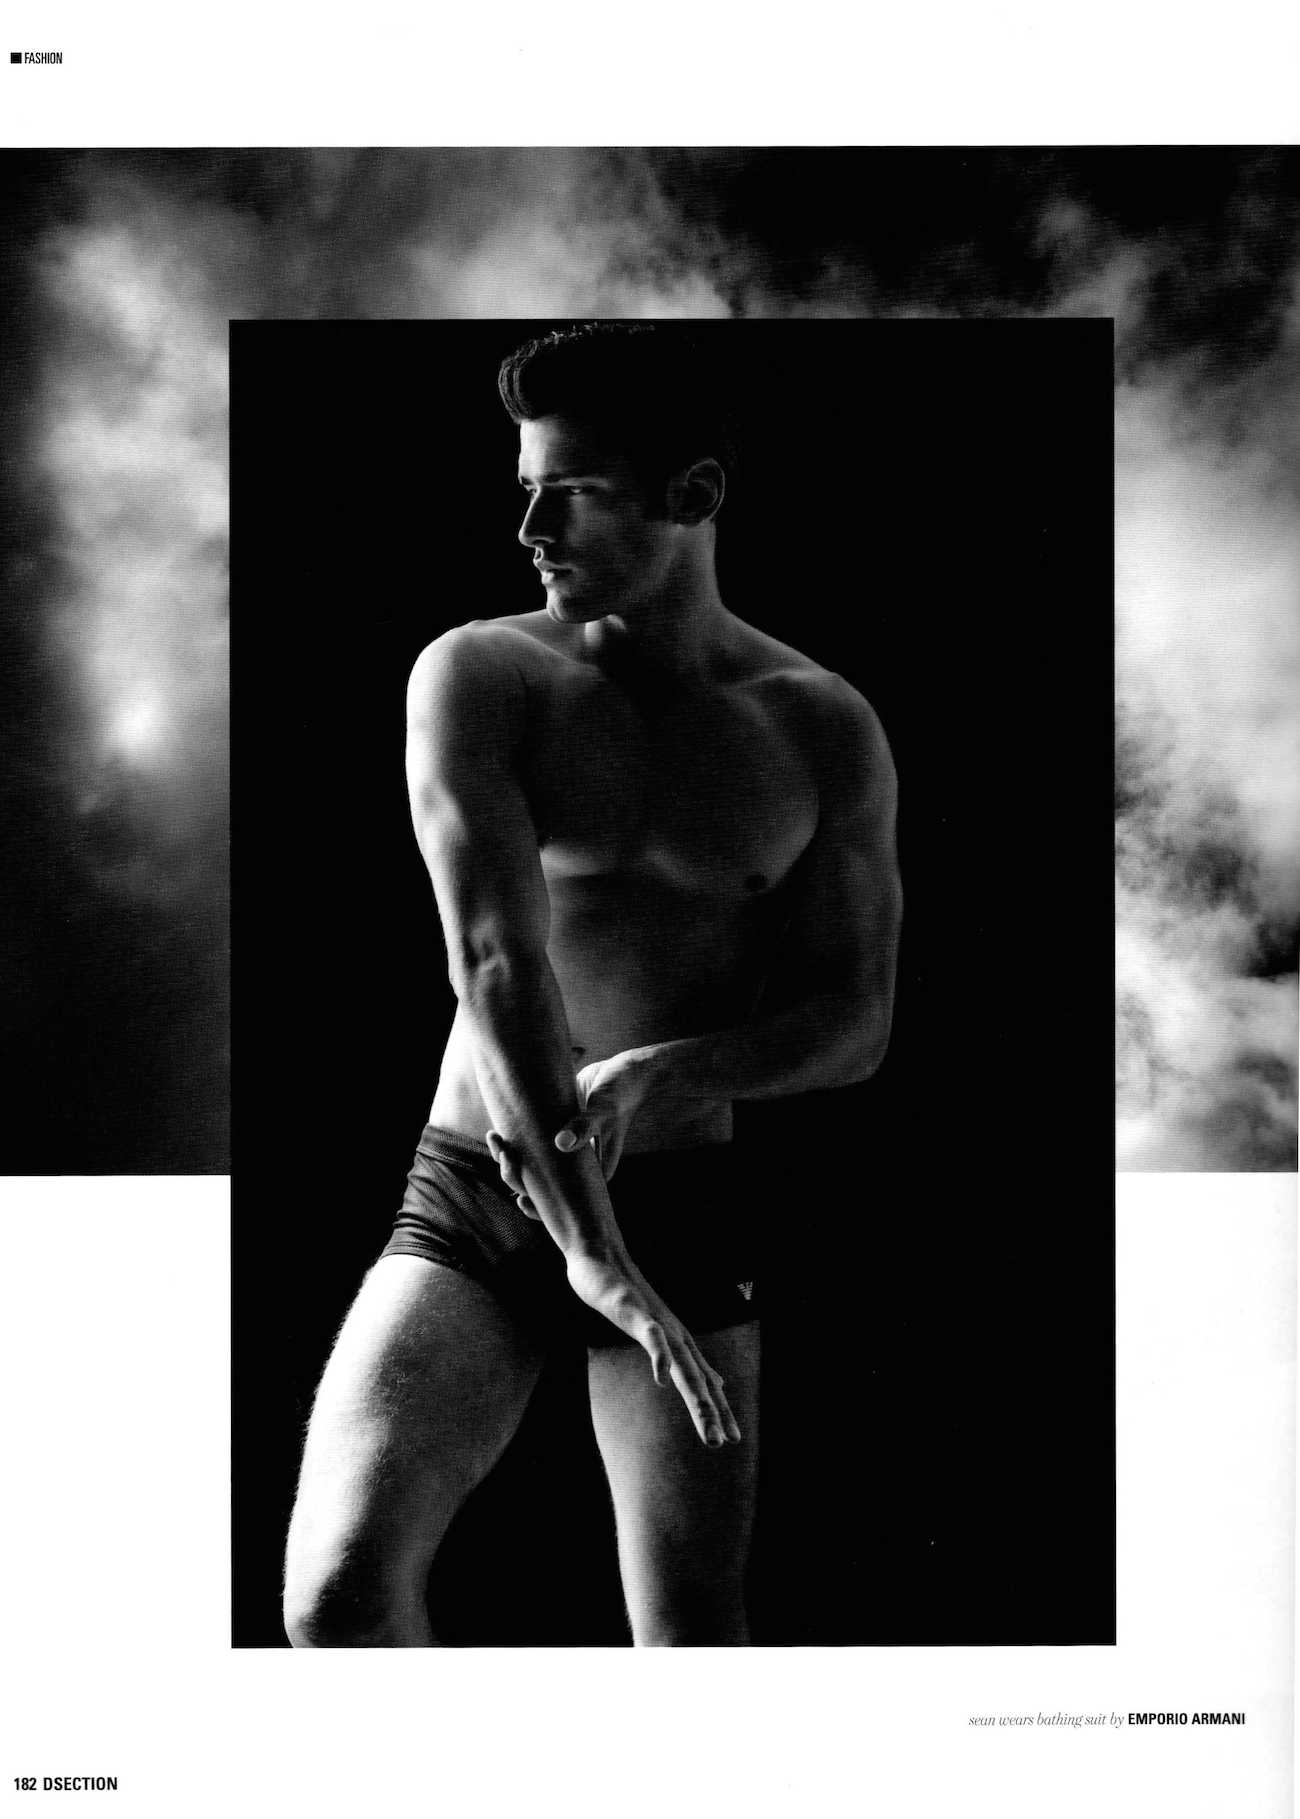 sean-opry-dsection-ss15-cover-story-016.jpg